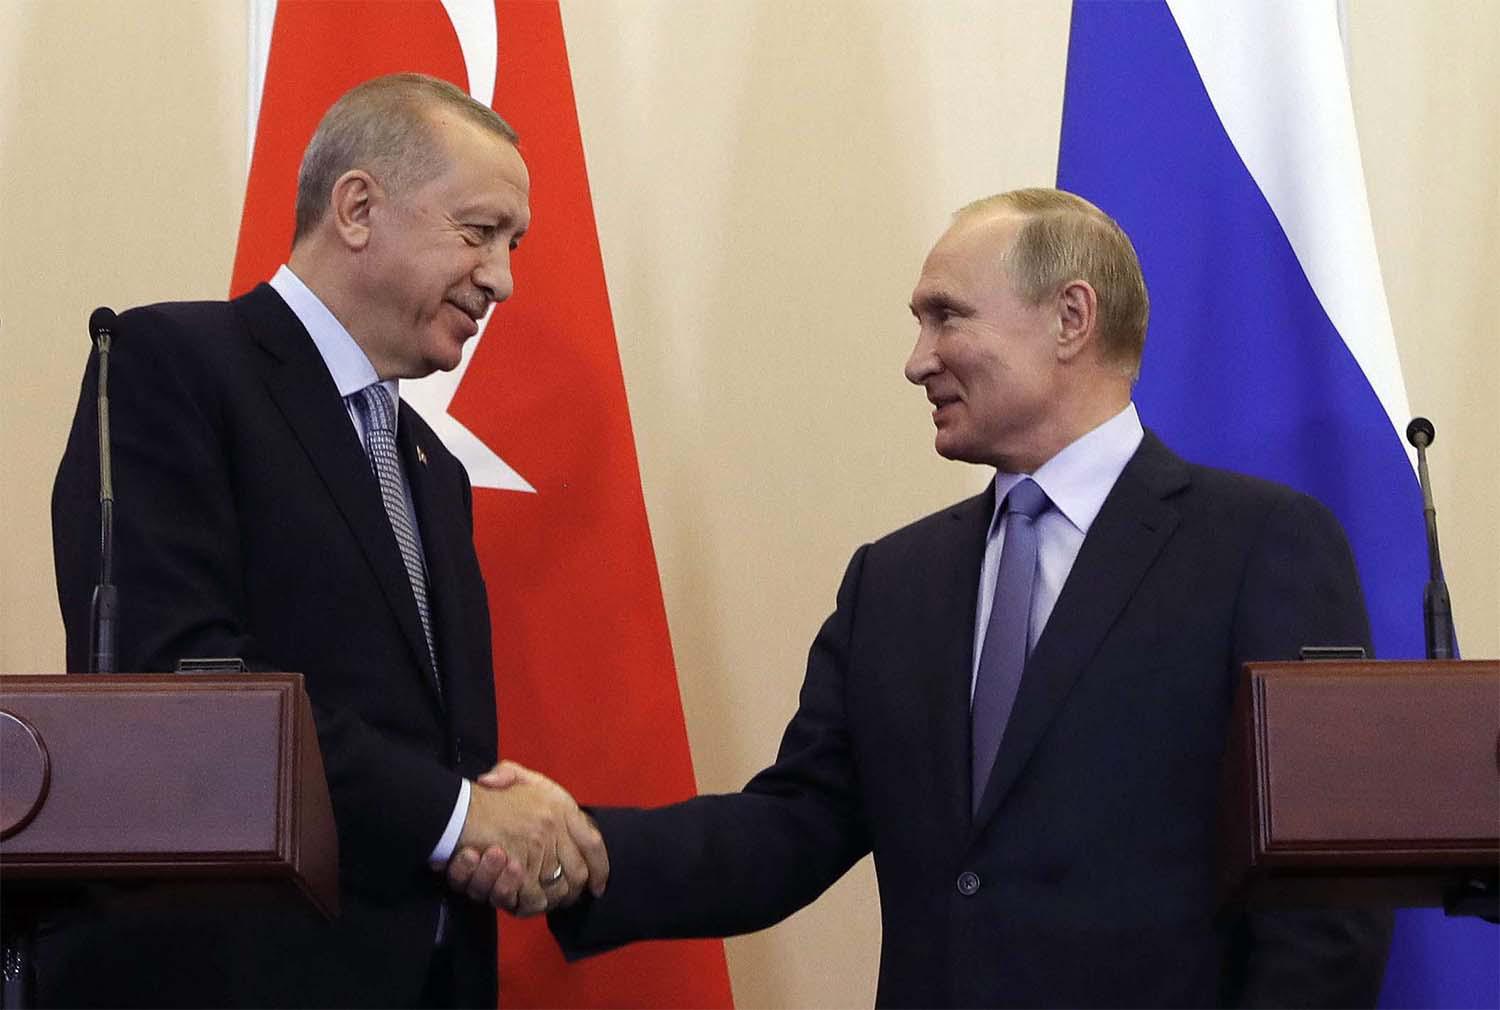 The Sochi accord deepened ties between Russia and Turkey